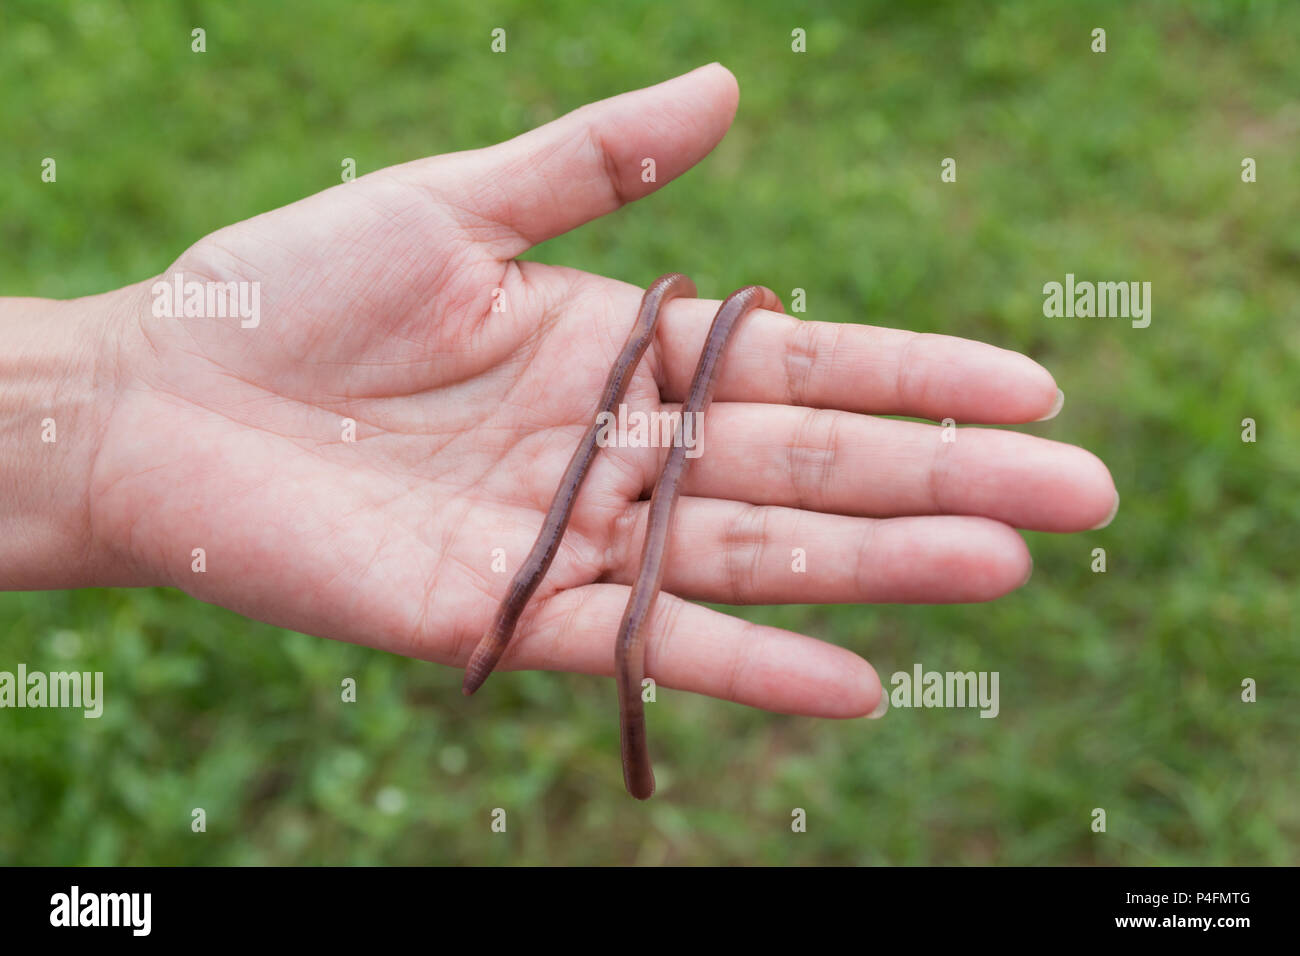 Female hand holding earth worms in hands. Stock Photo